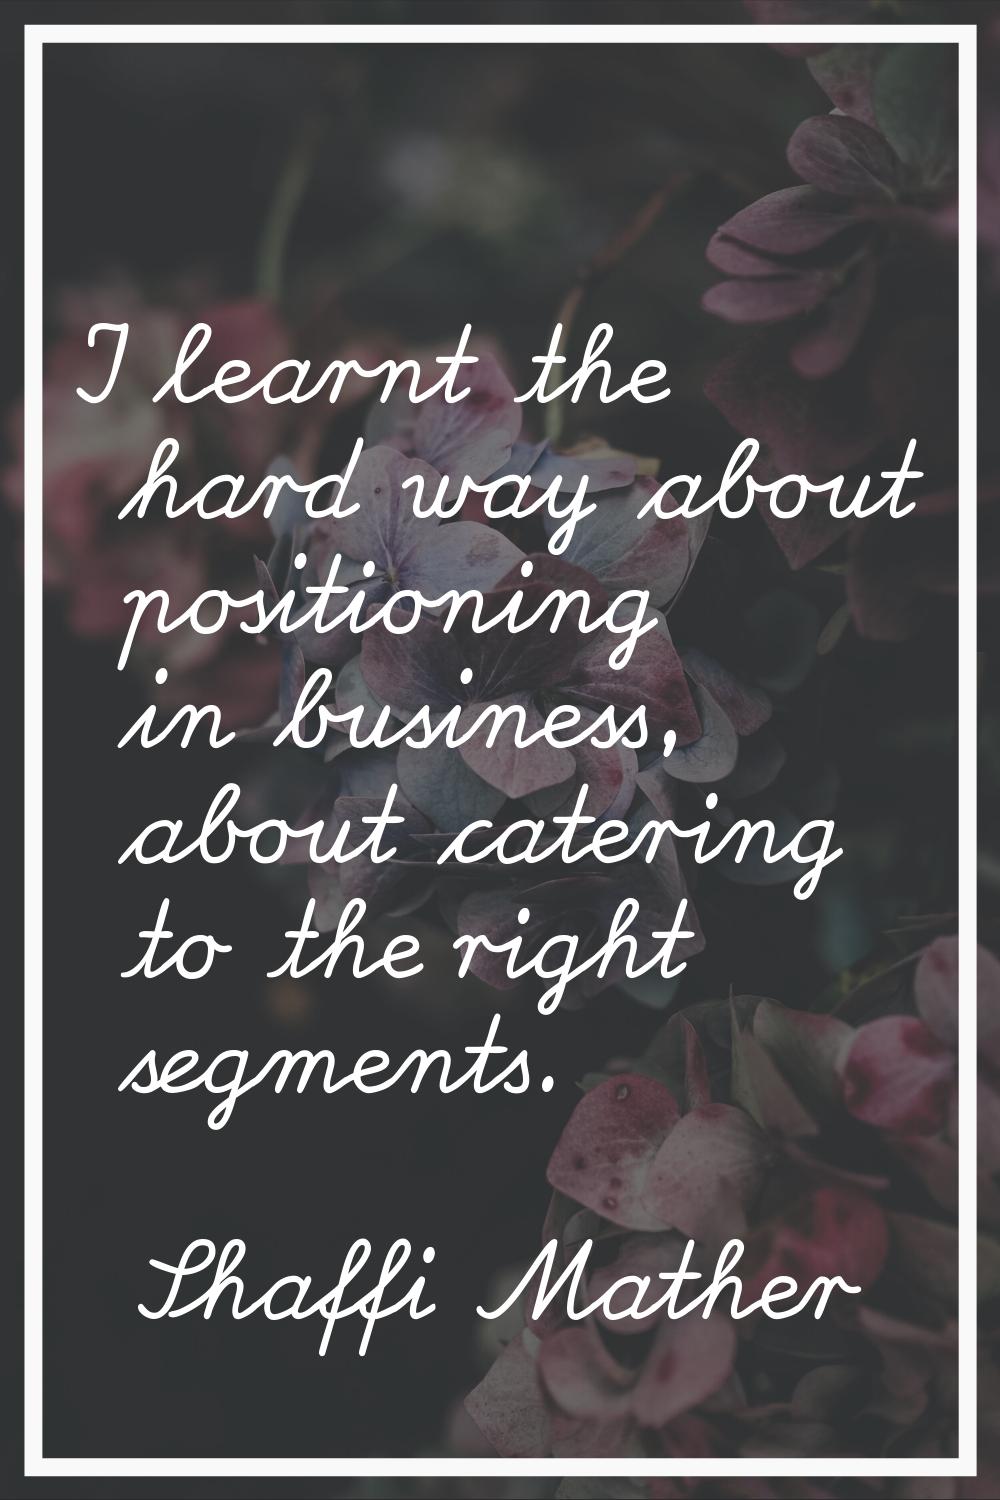 I learnt the hard way about positioning in business, about catering to the right segments.